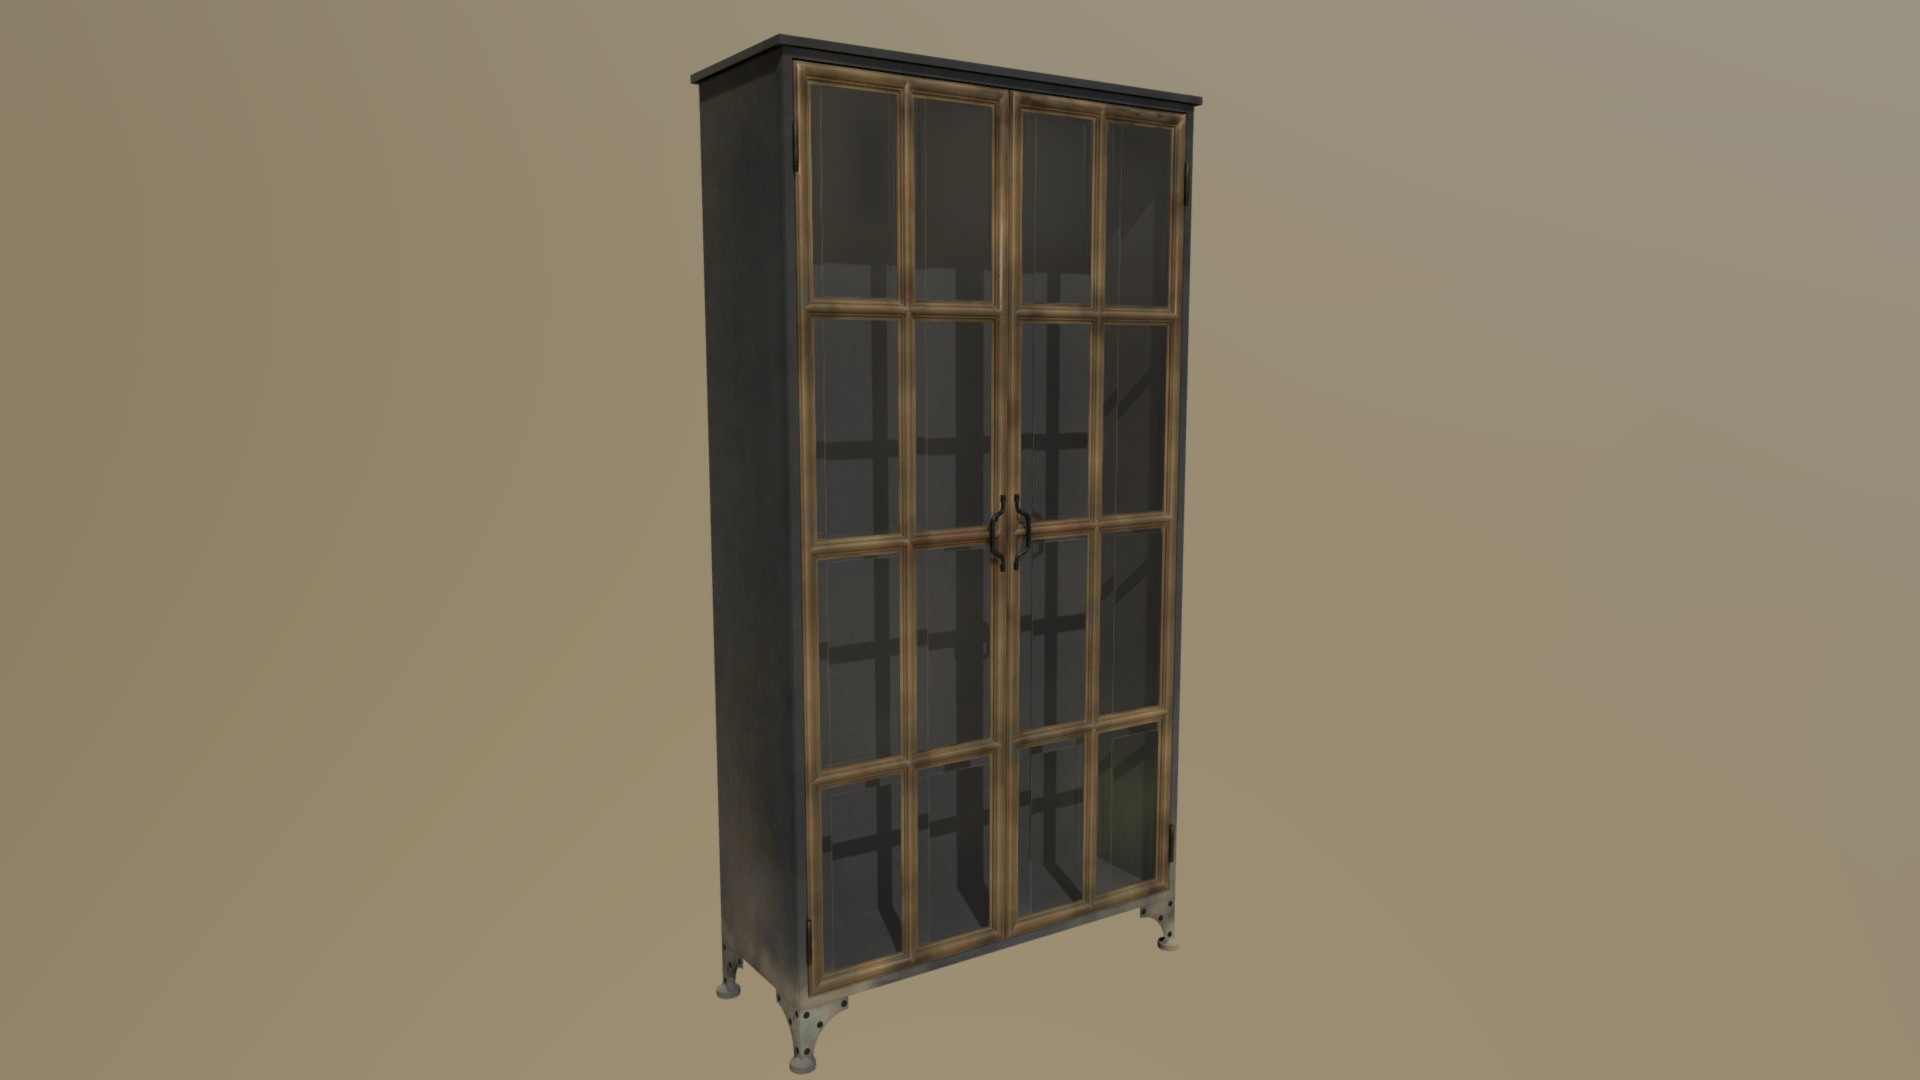 3D model Old Bookcase - This is a 3D model of the Old Bookcase. The 3D model is about a window with bars on it.